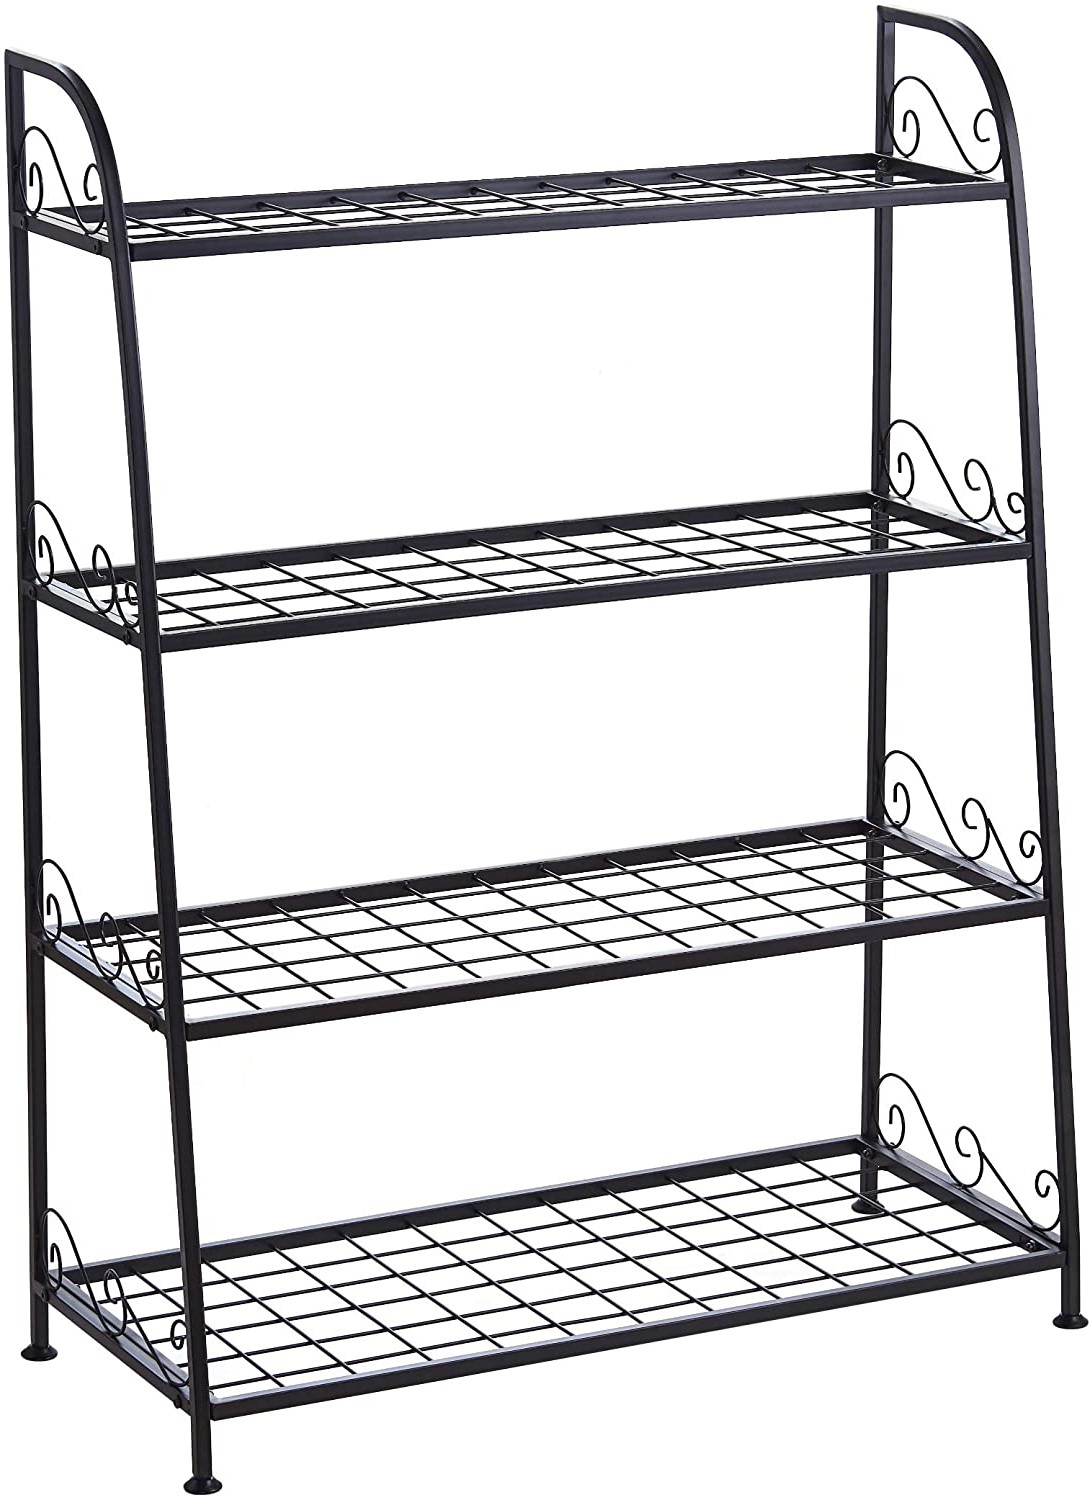 Greenhouse Shelving Unit 4 Tier Tapered